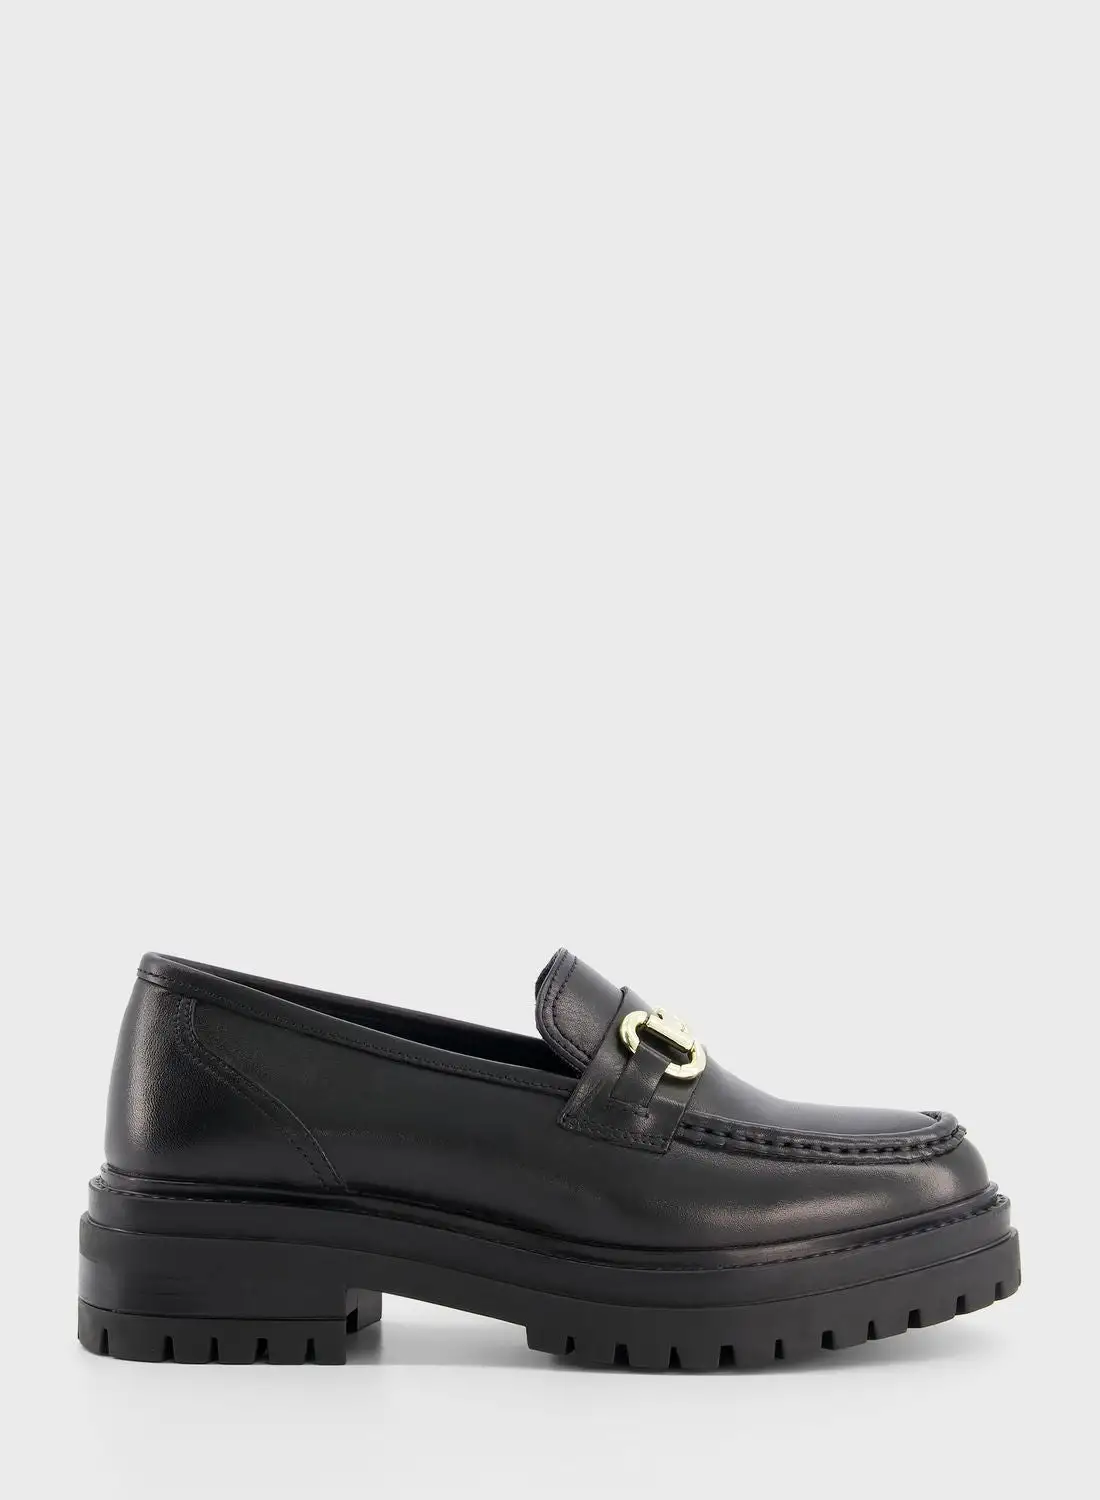 Dune LONDON Gallagher Loafers